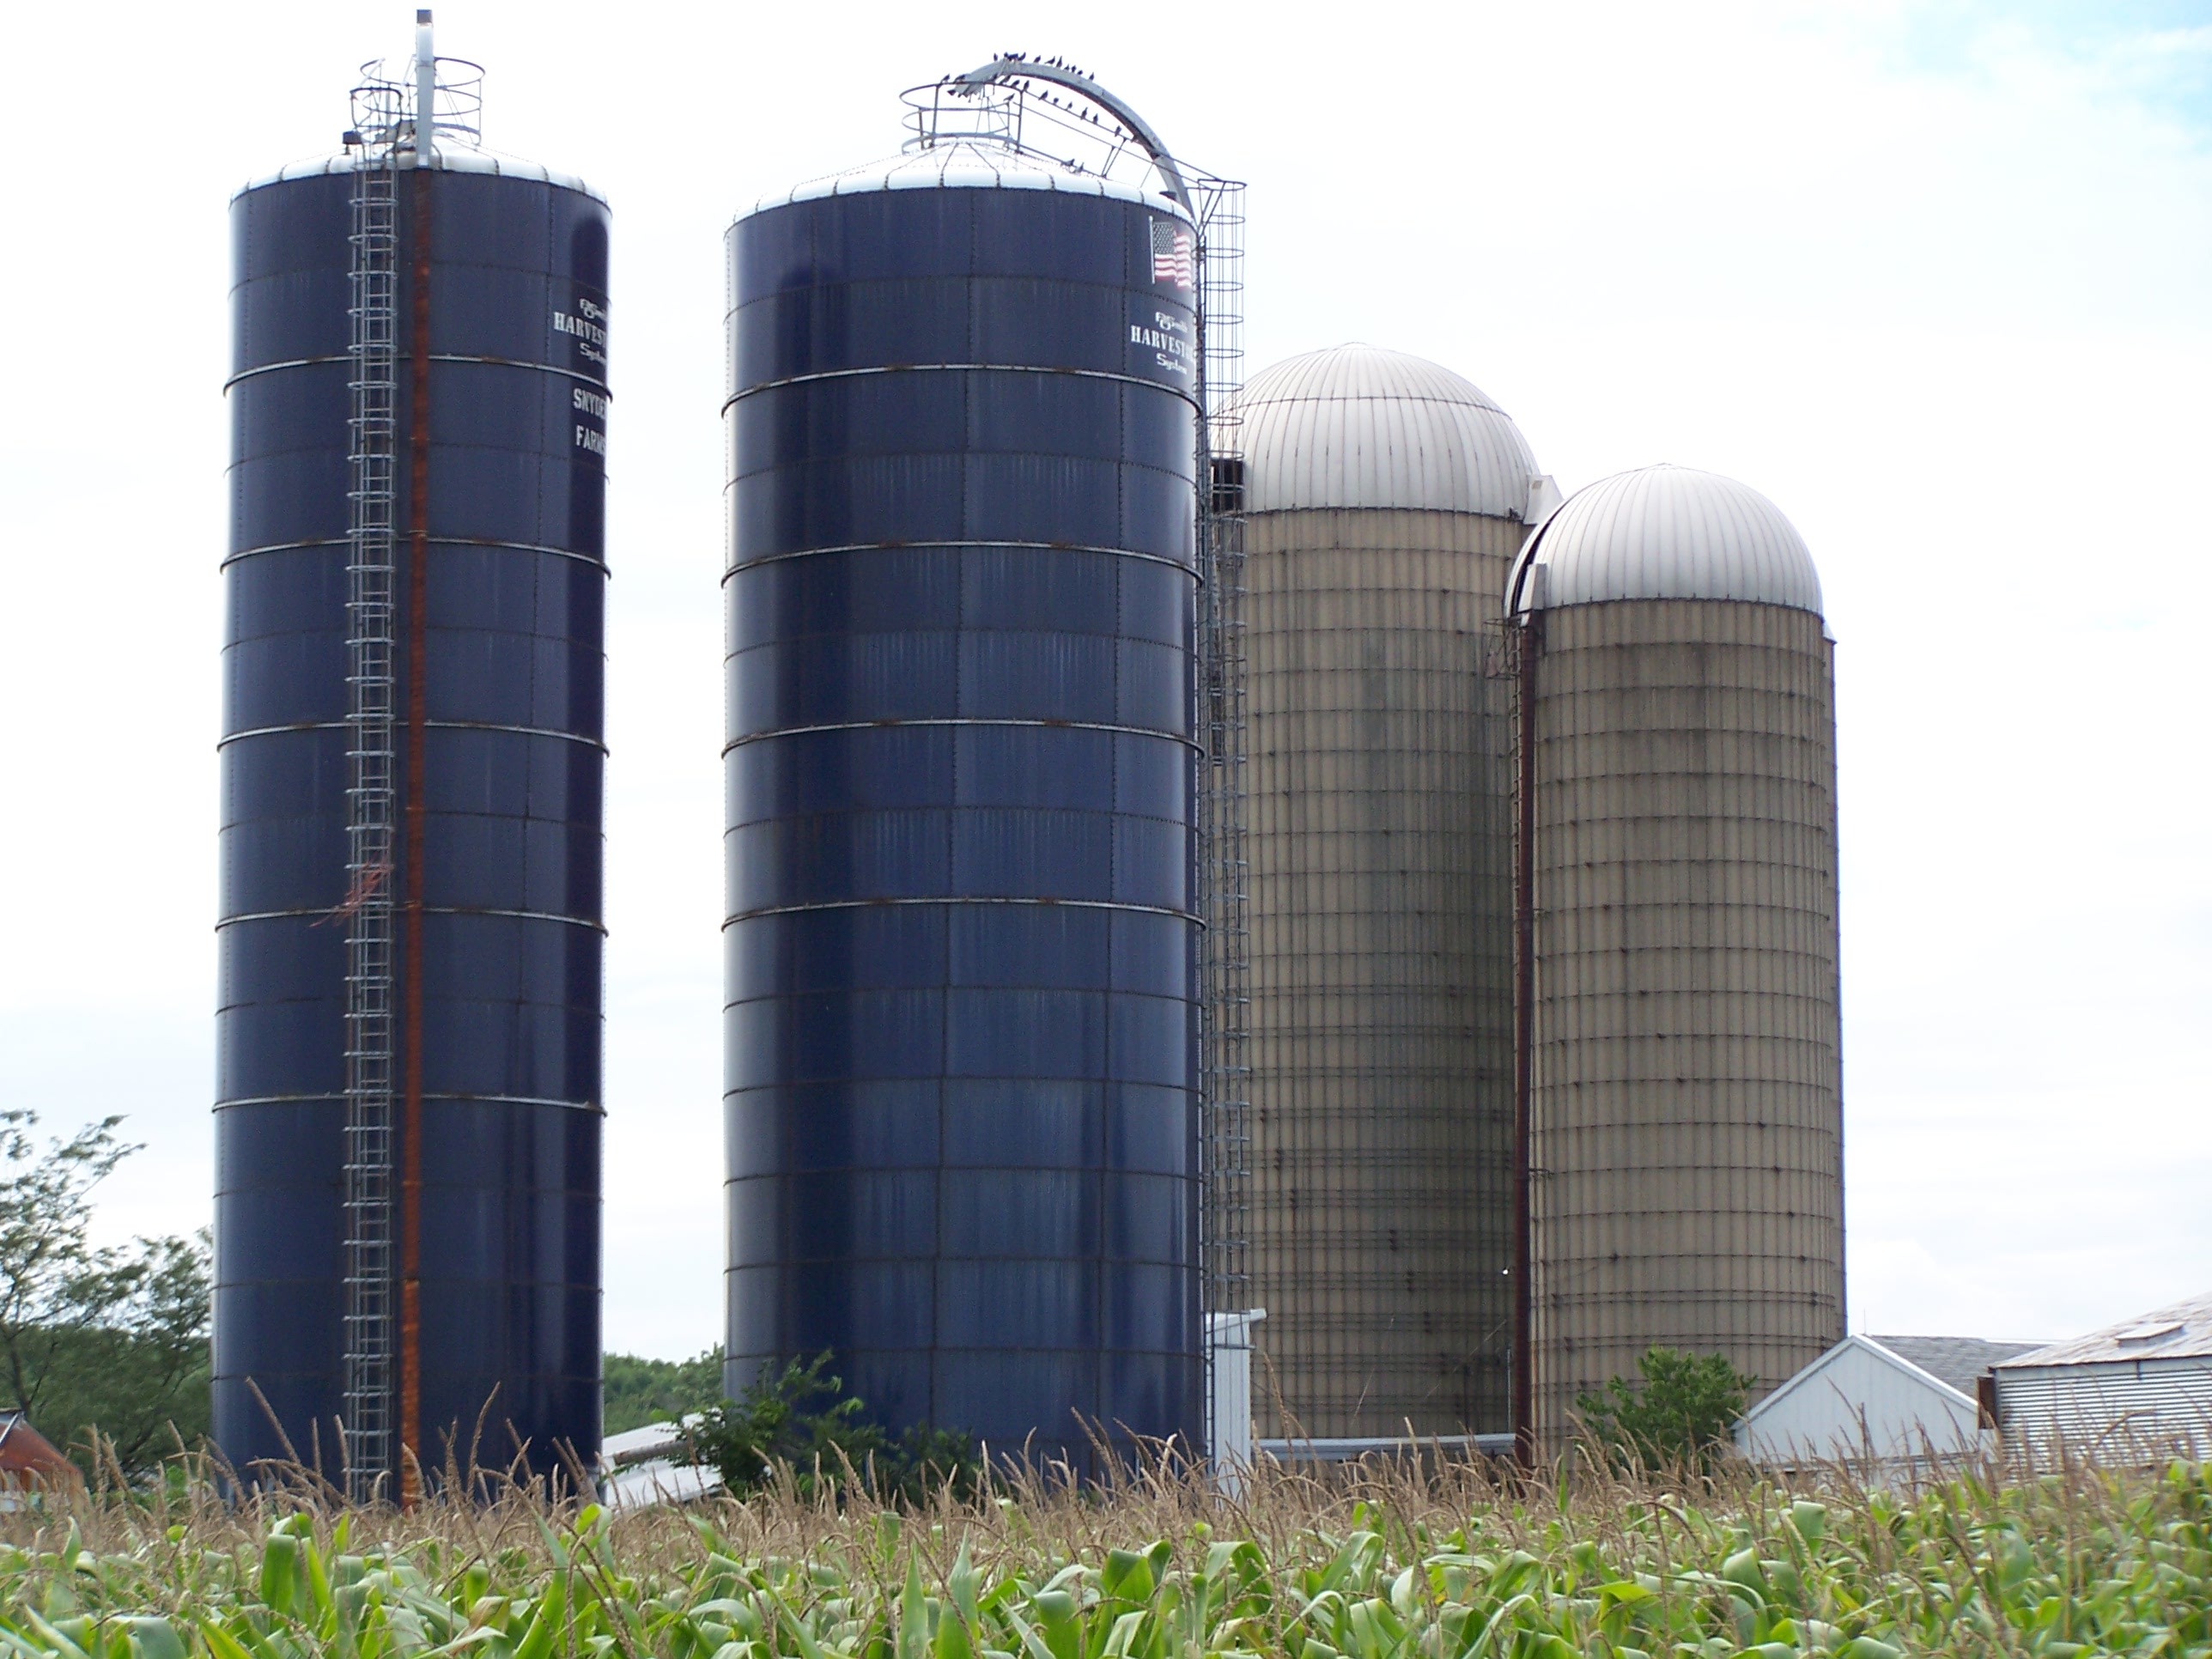 File:Silos in Indiana.jpg - Wikimedia Commons